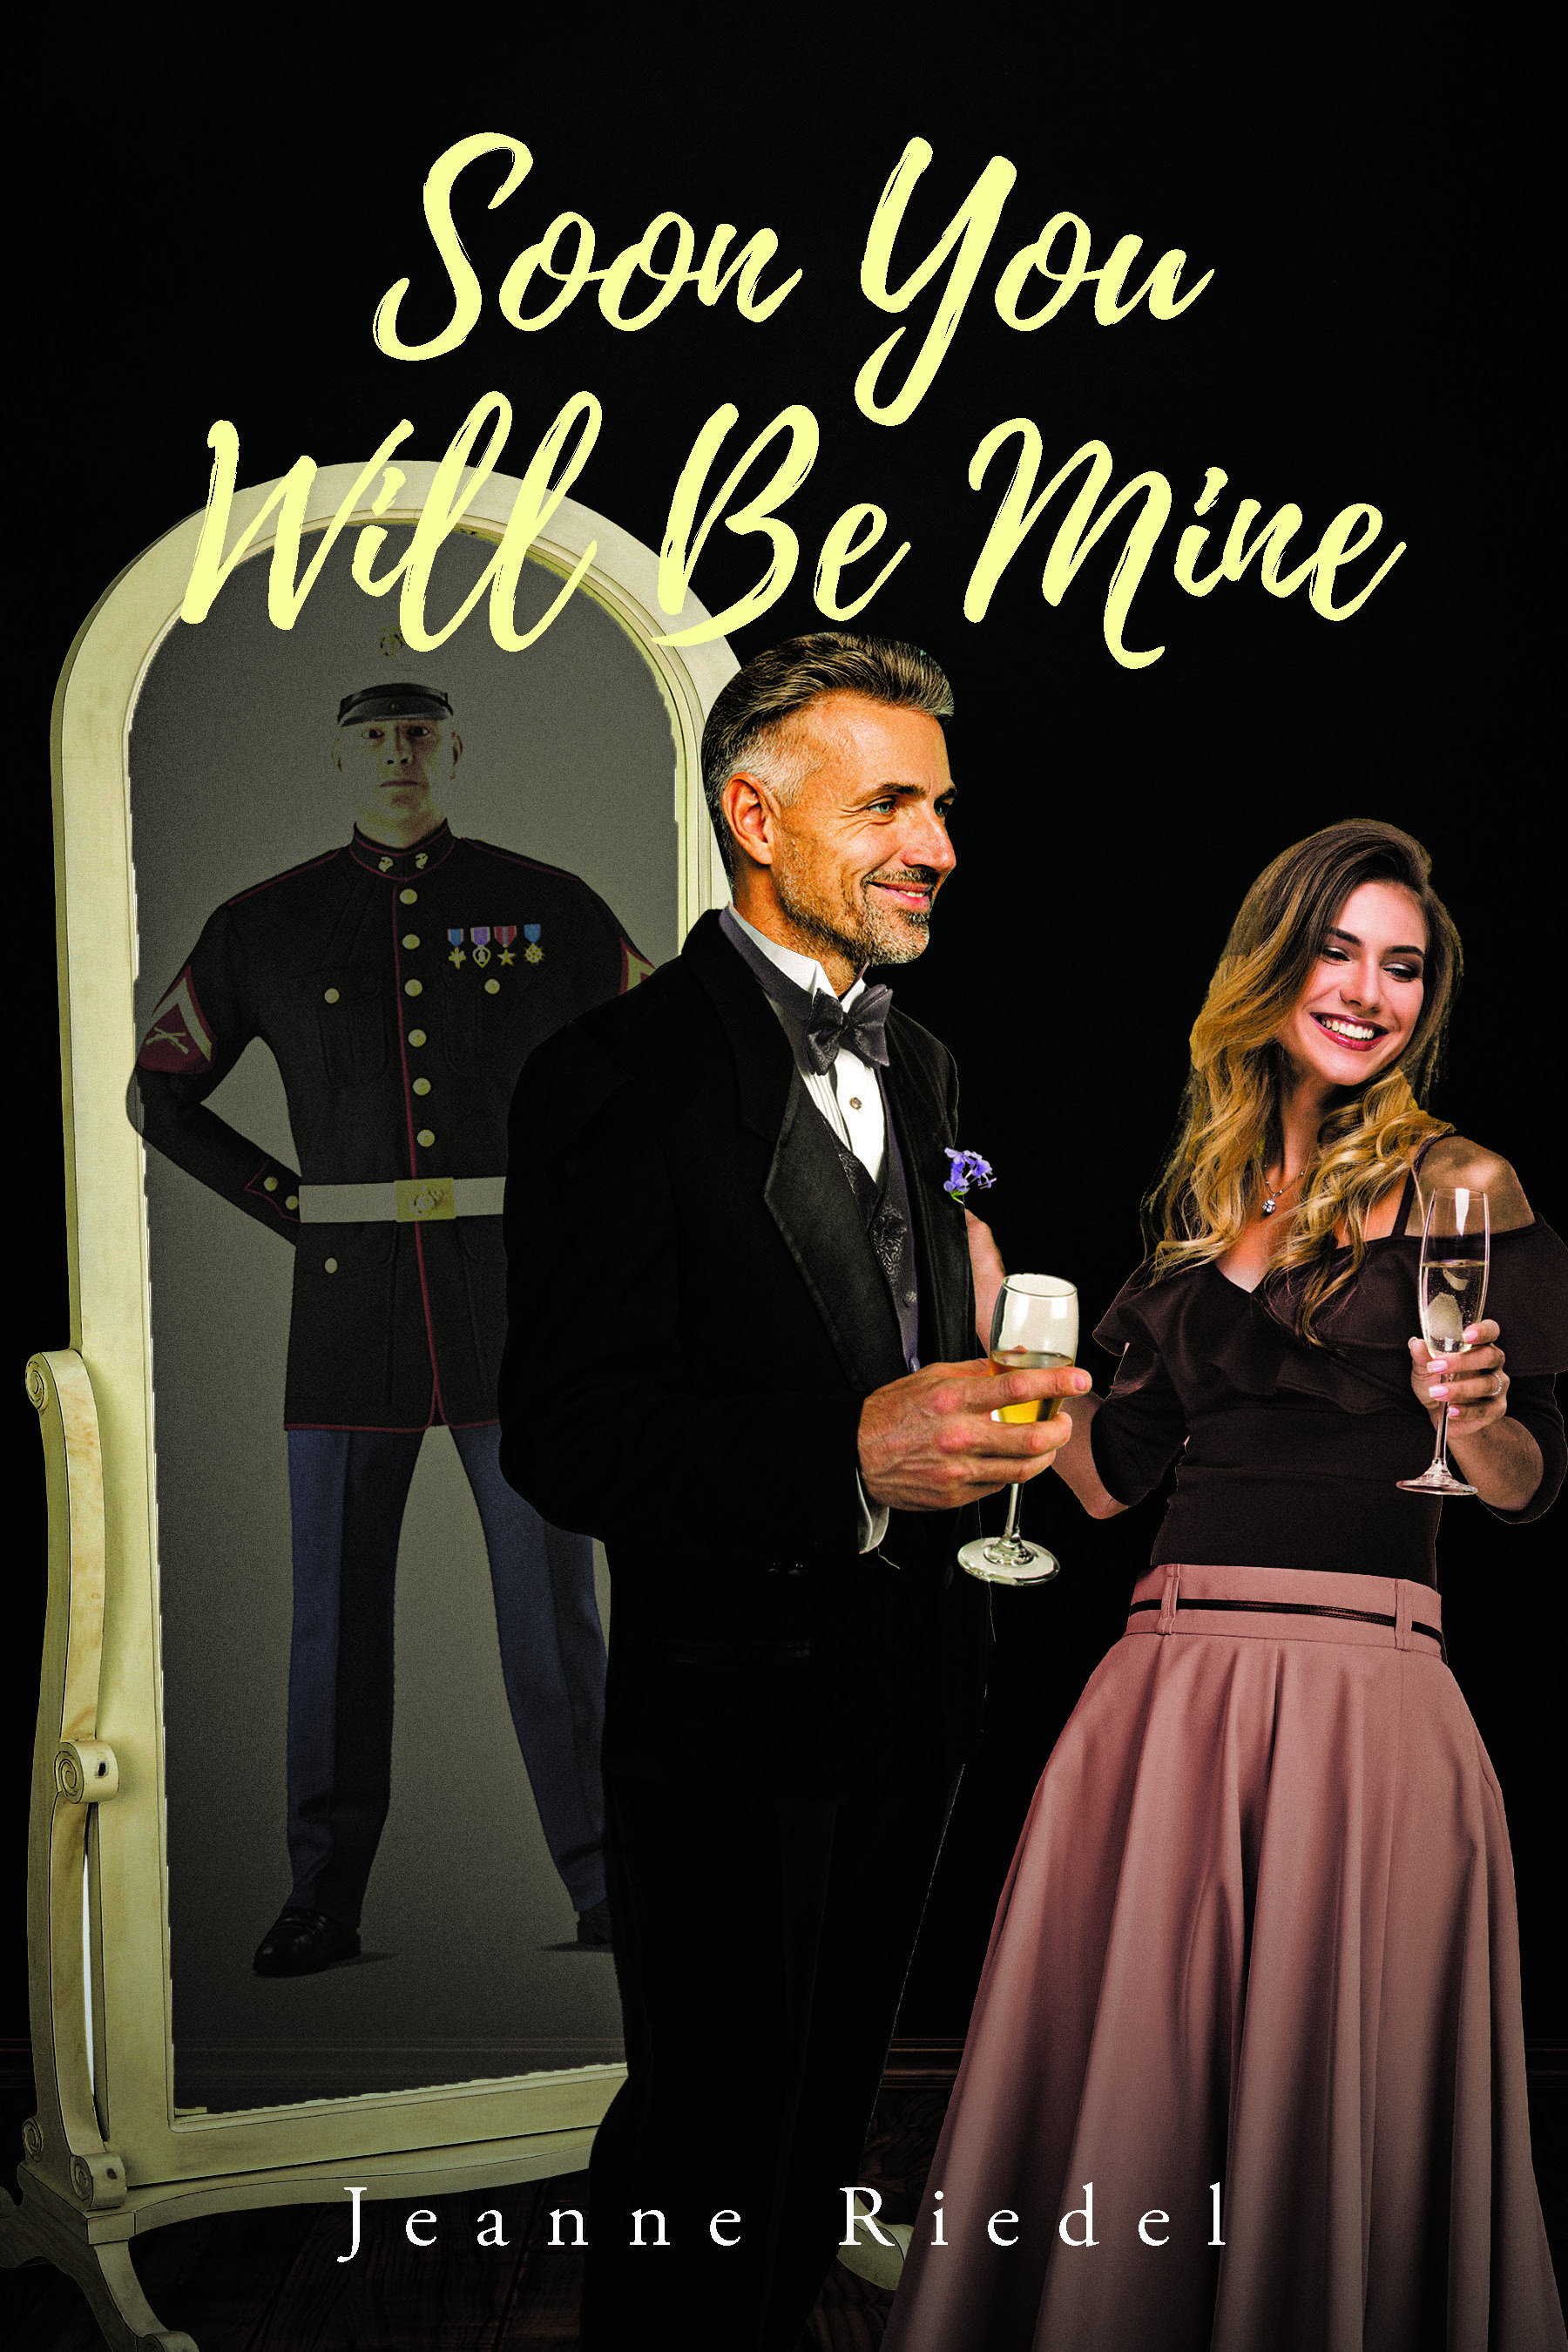 Jeanne Riedel’s Newly Released "Soon You Will Be Mine" is a Captivating Tale of Love, Betrayal, and Retribution